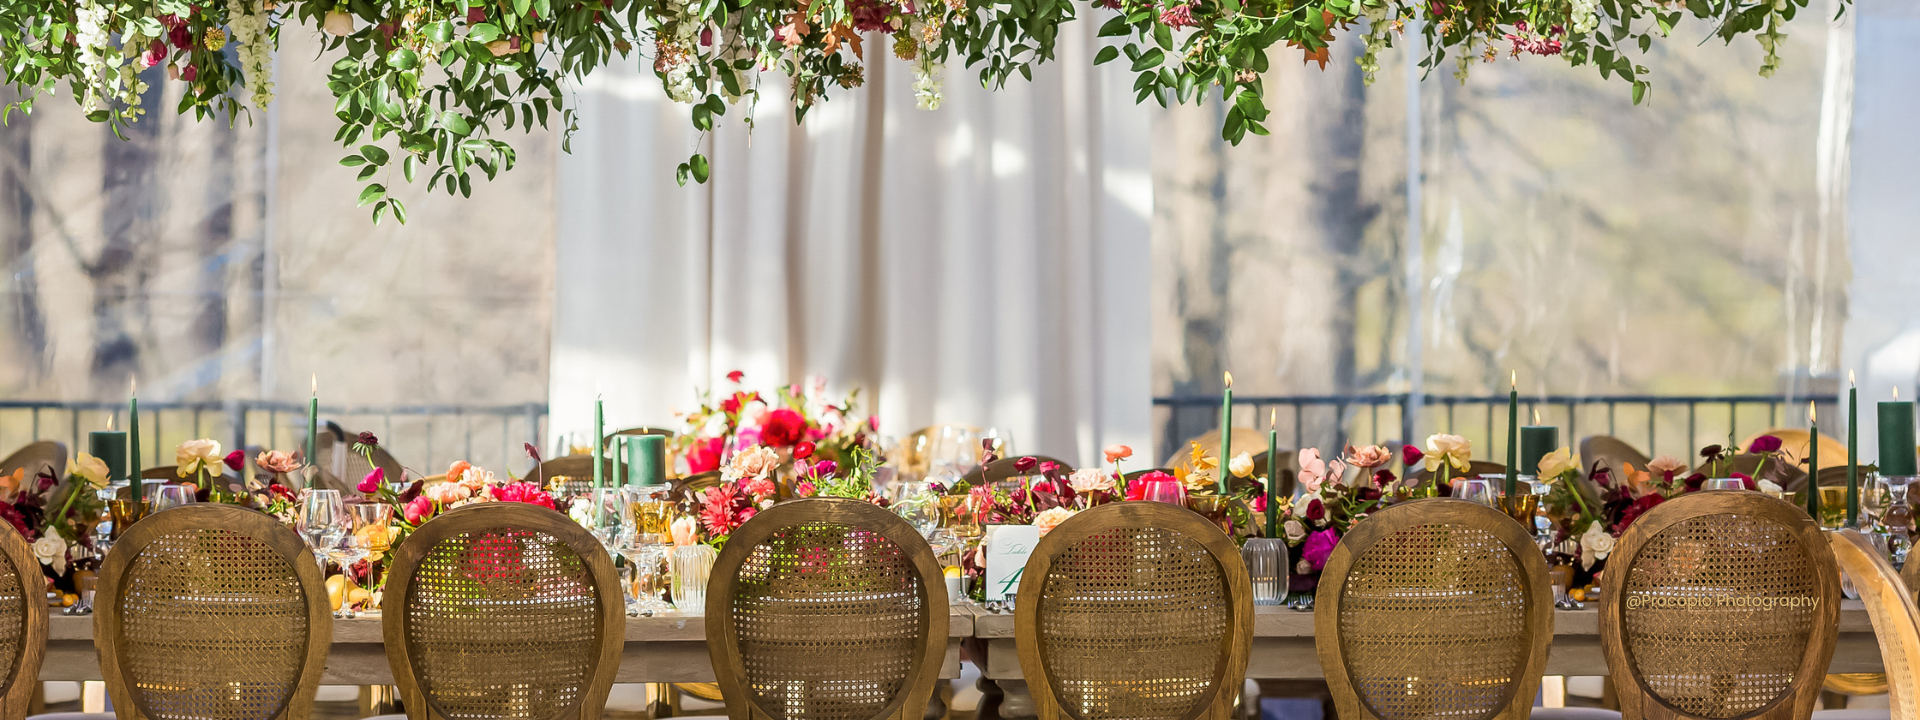 Wedding tablescape with Hunter Green pillars and tapers by procopio photography